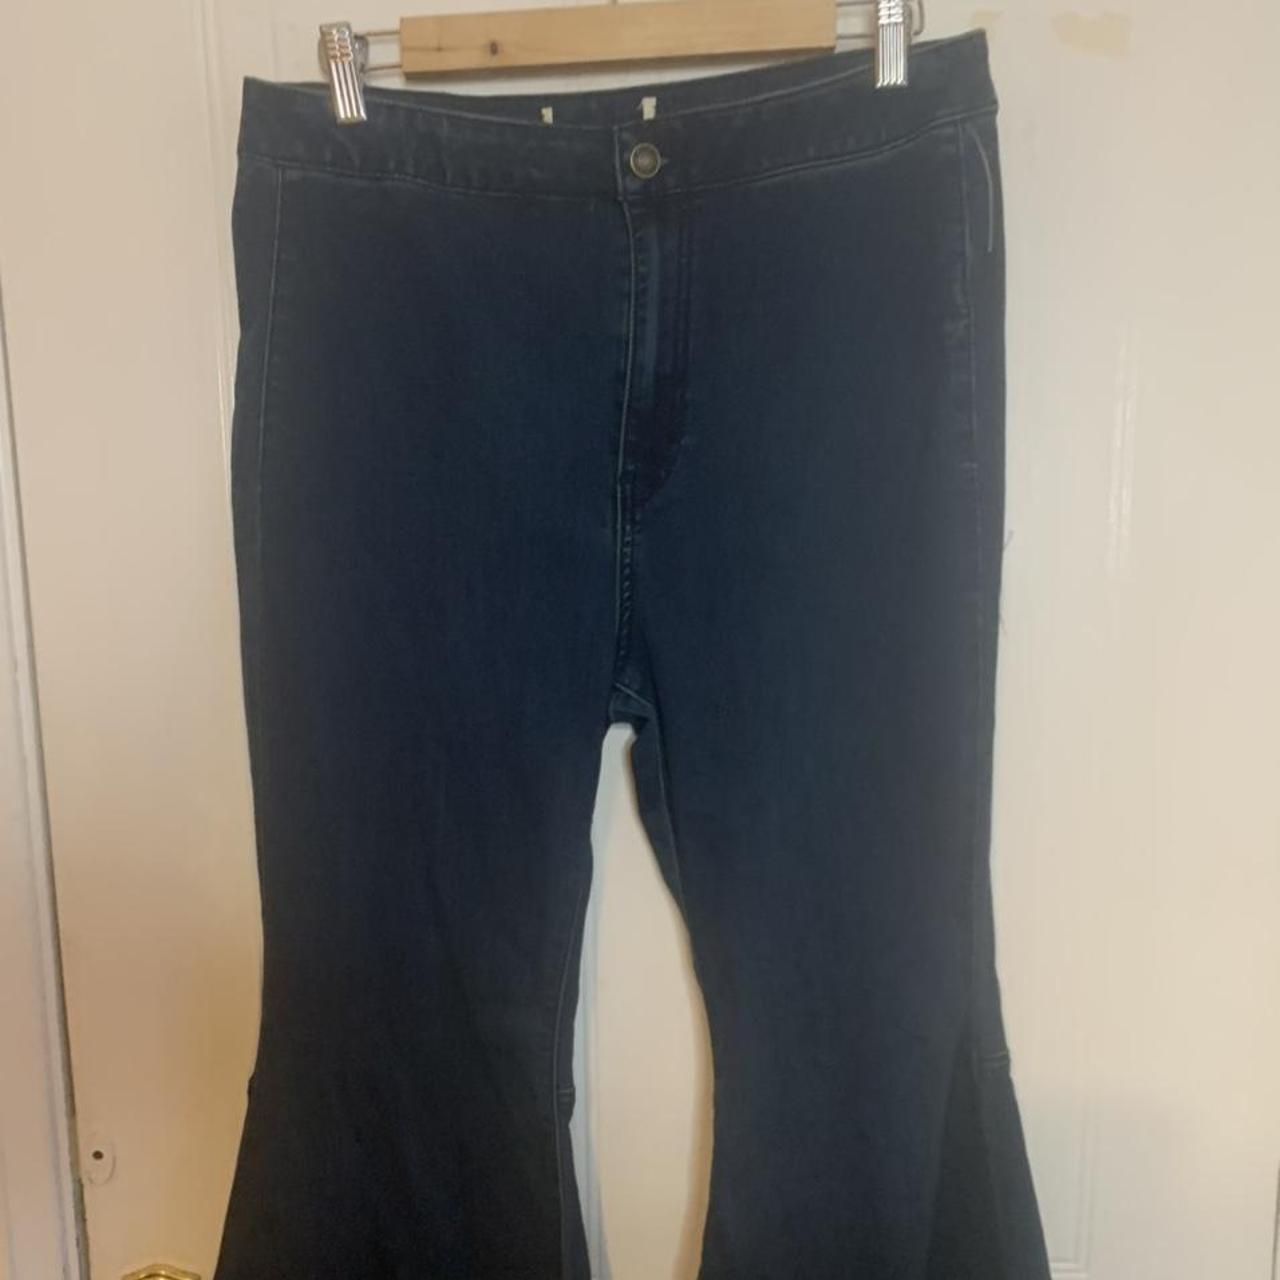 Product Image 2 - Free people flares
Bell bottoms
Size UK